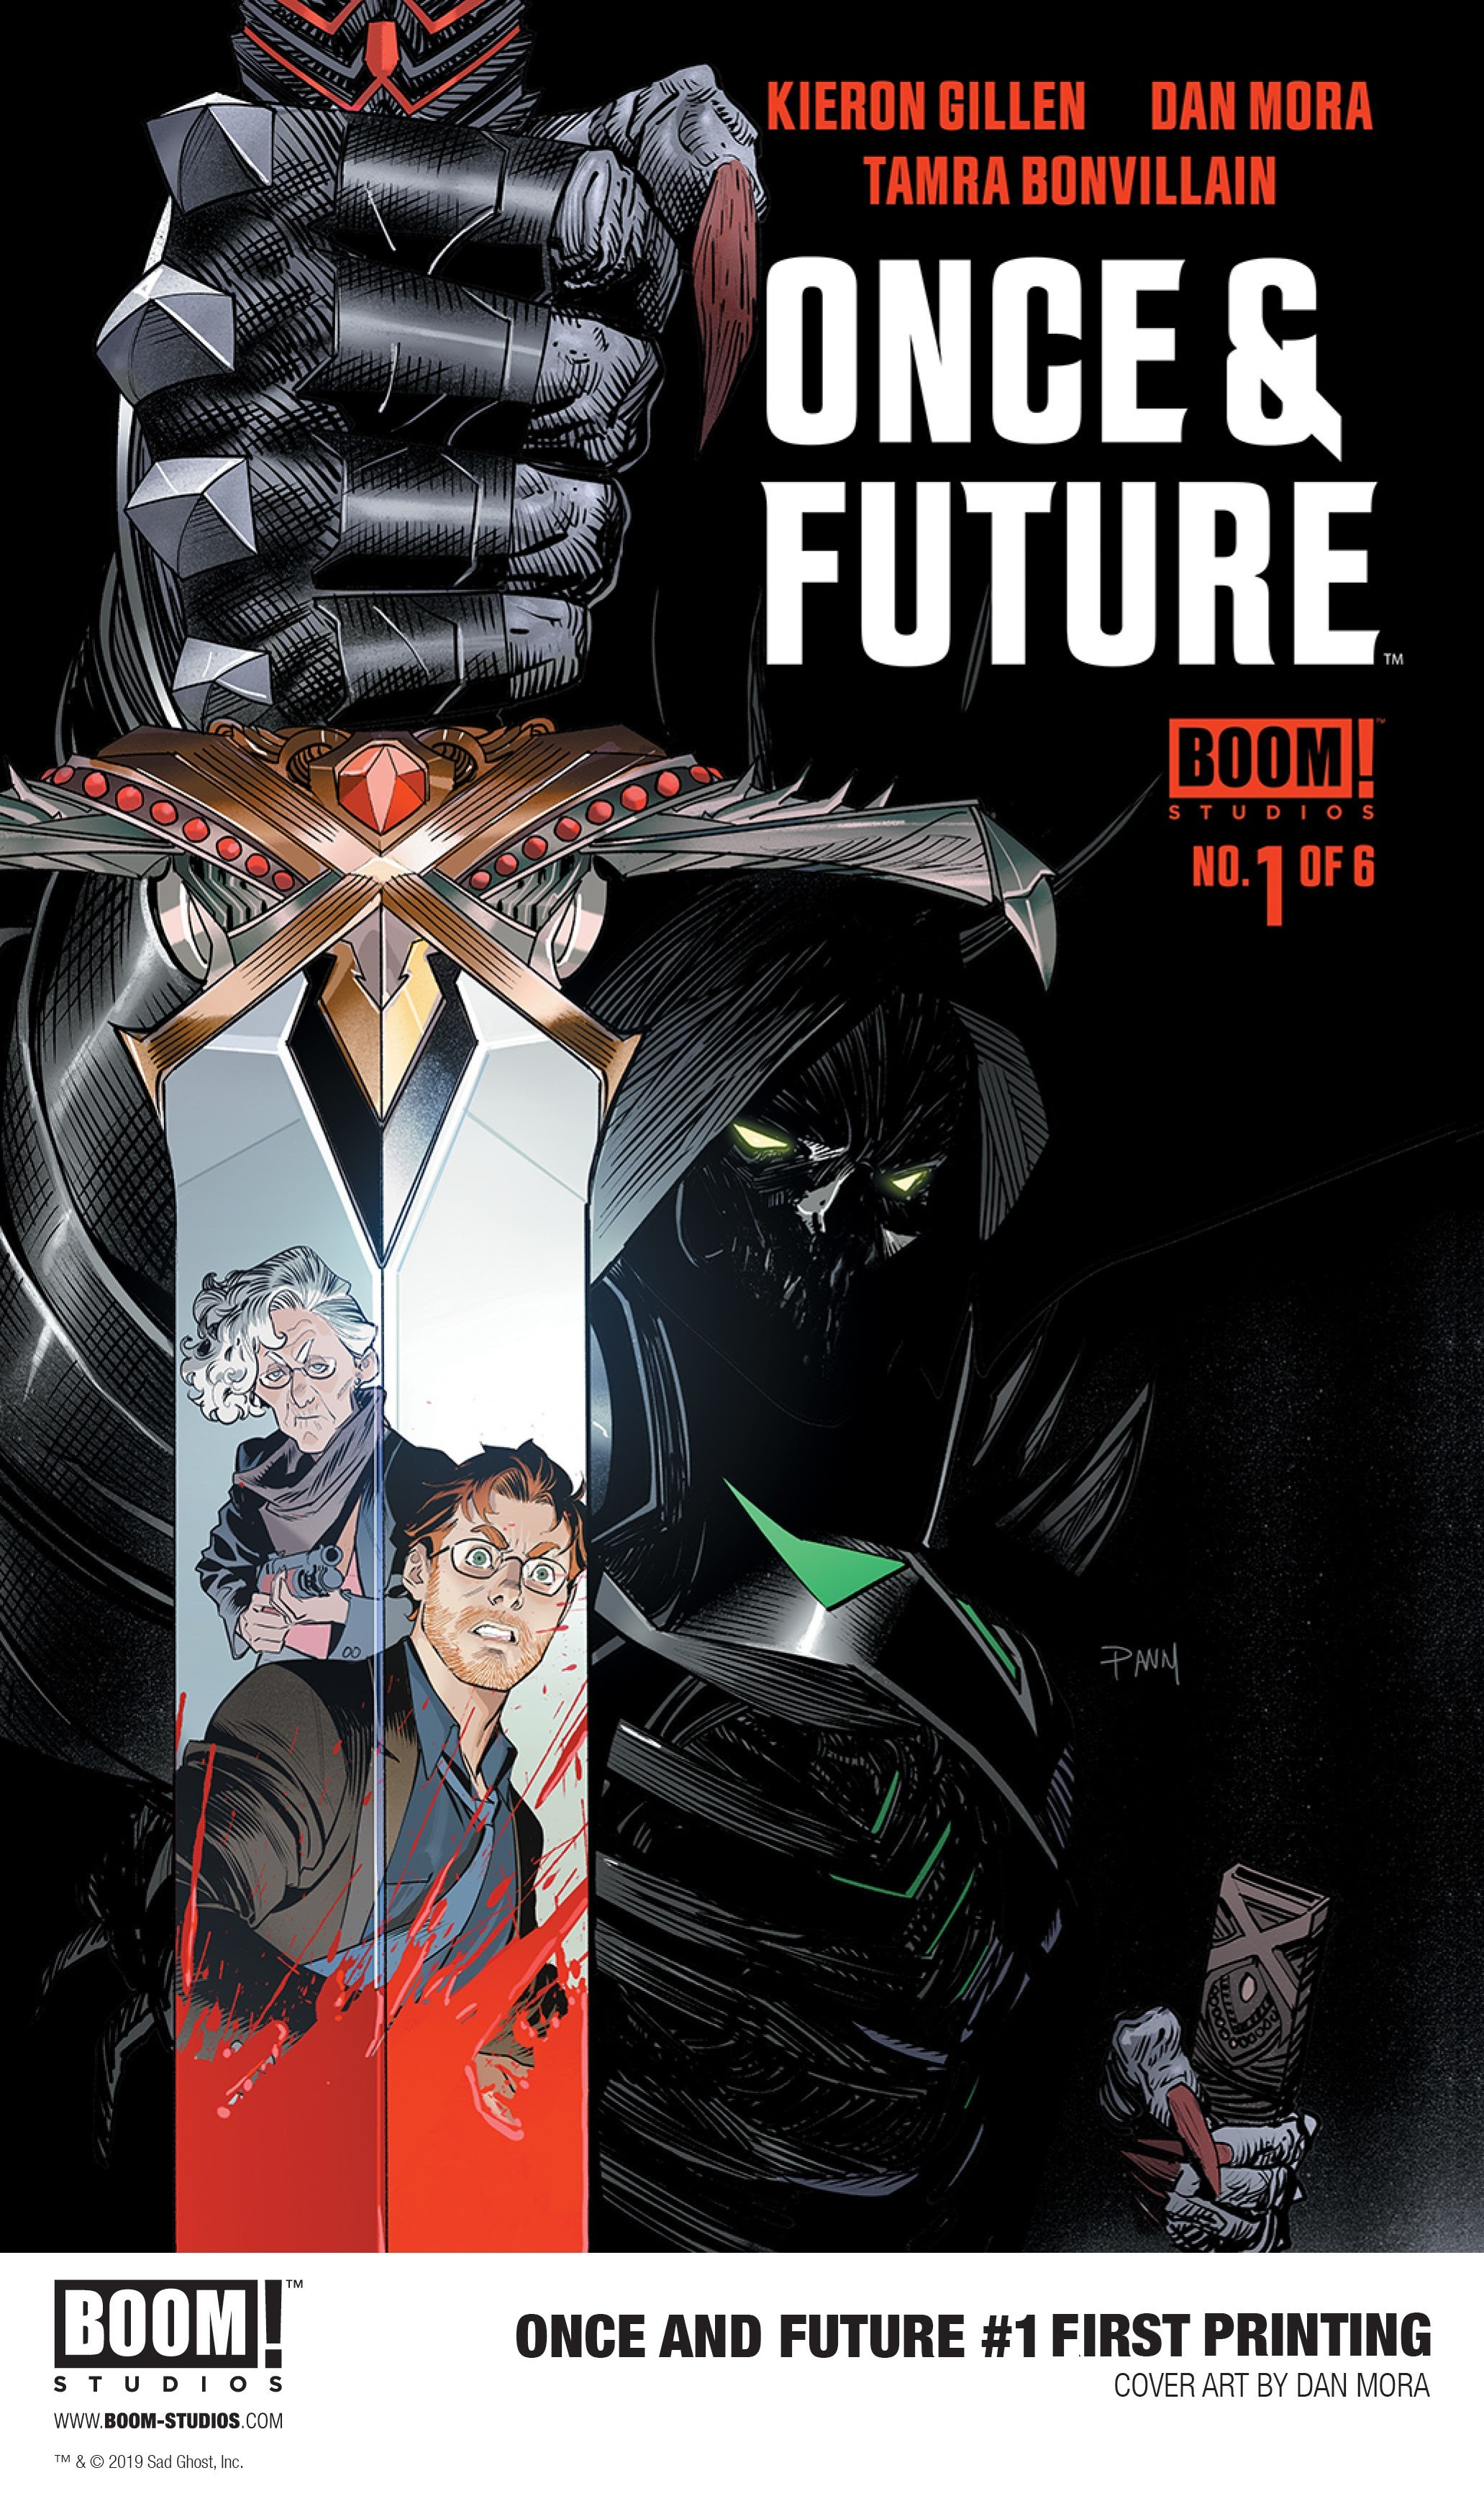 Once & Future #1 first printing